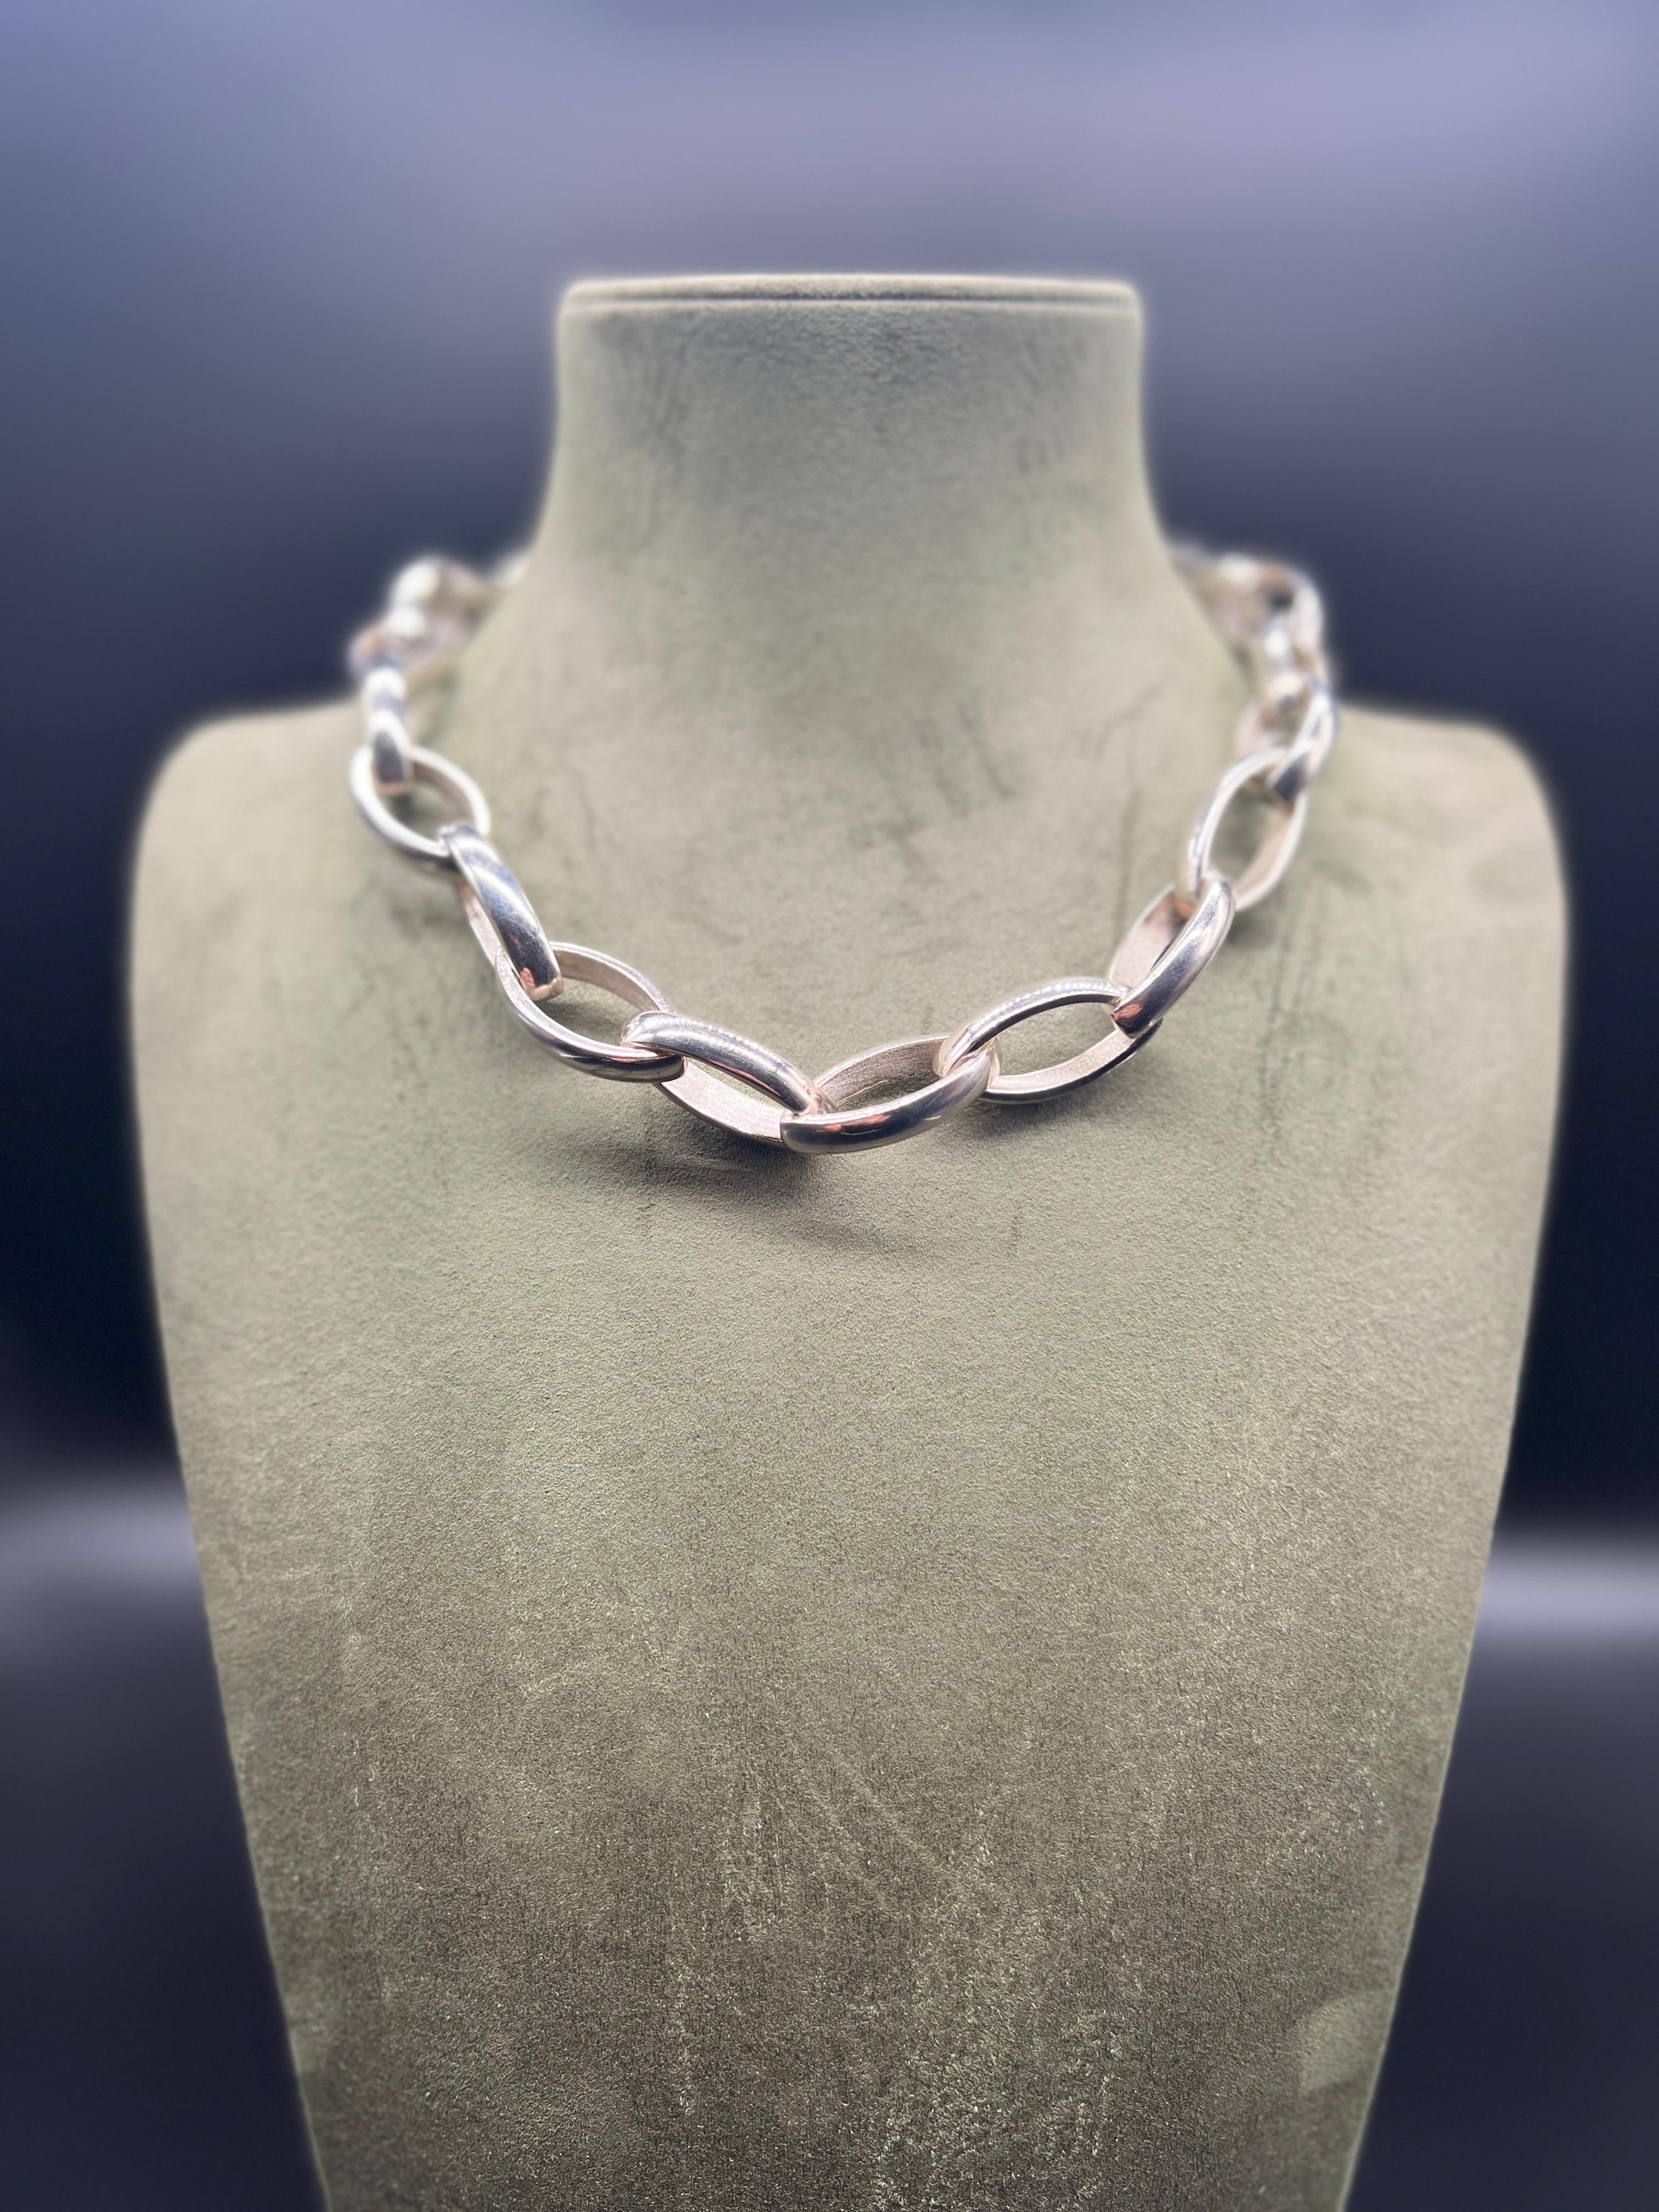 Discover this magnificent 925/1000 silver chain that combines elegance with superior craftsmanship. This chain is specially crafted with almond-shaped links, adding a distinctive touch to its sophisticated design. Weighing just over 120g, this chain